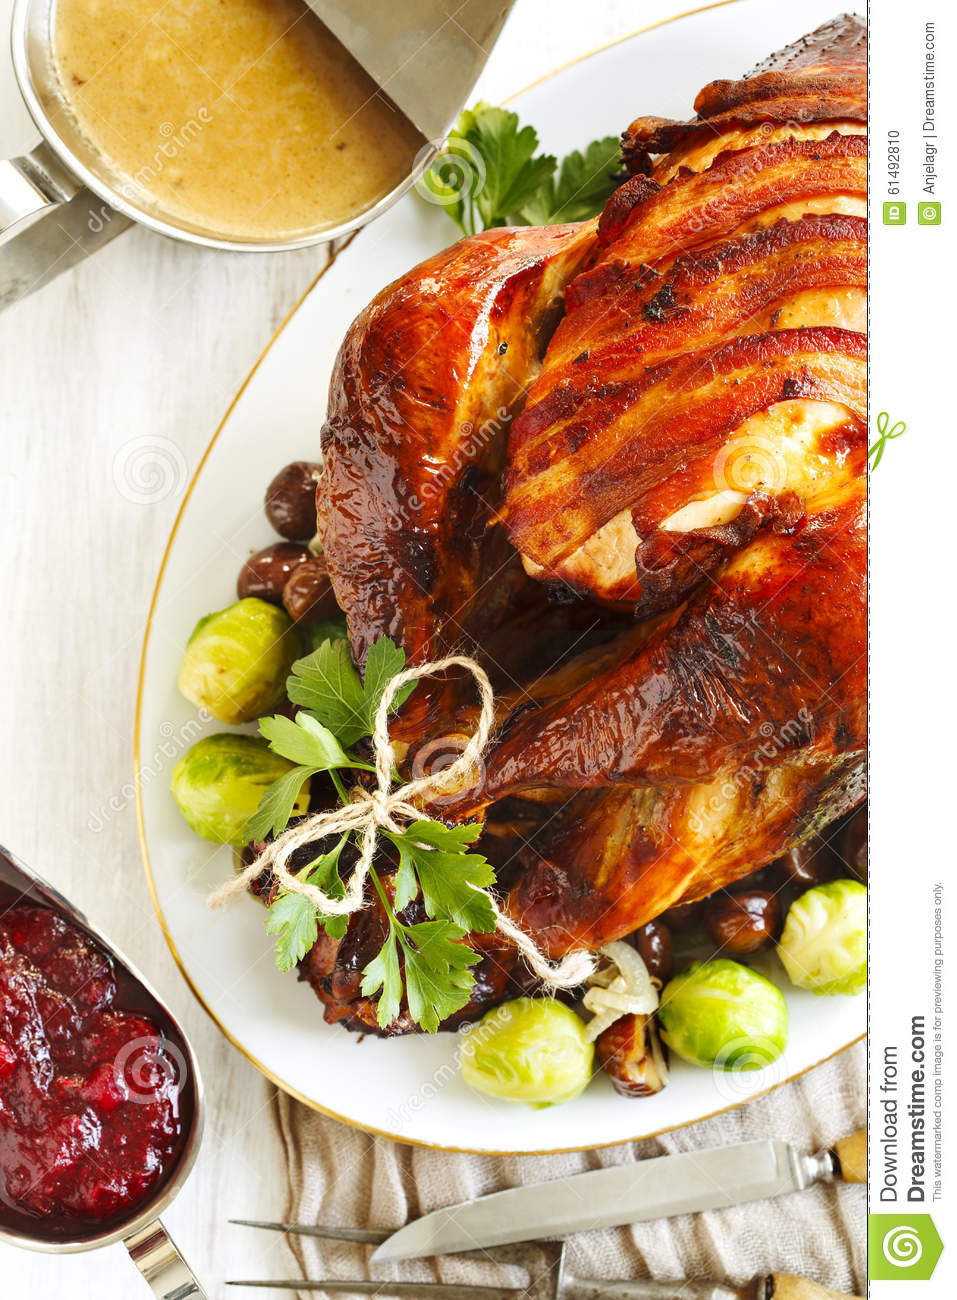 Prepared Turkey For Thanksgiving
 Roasted Turkey With Bacon And Garnished With Chestnuts And